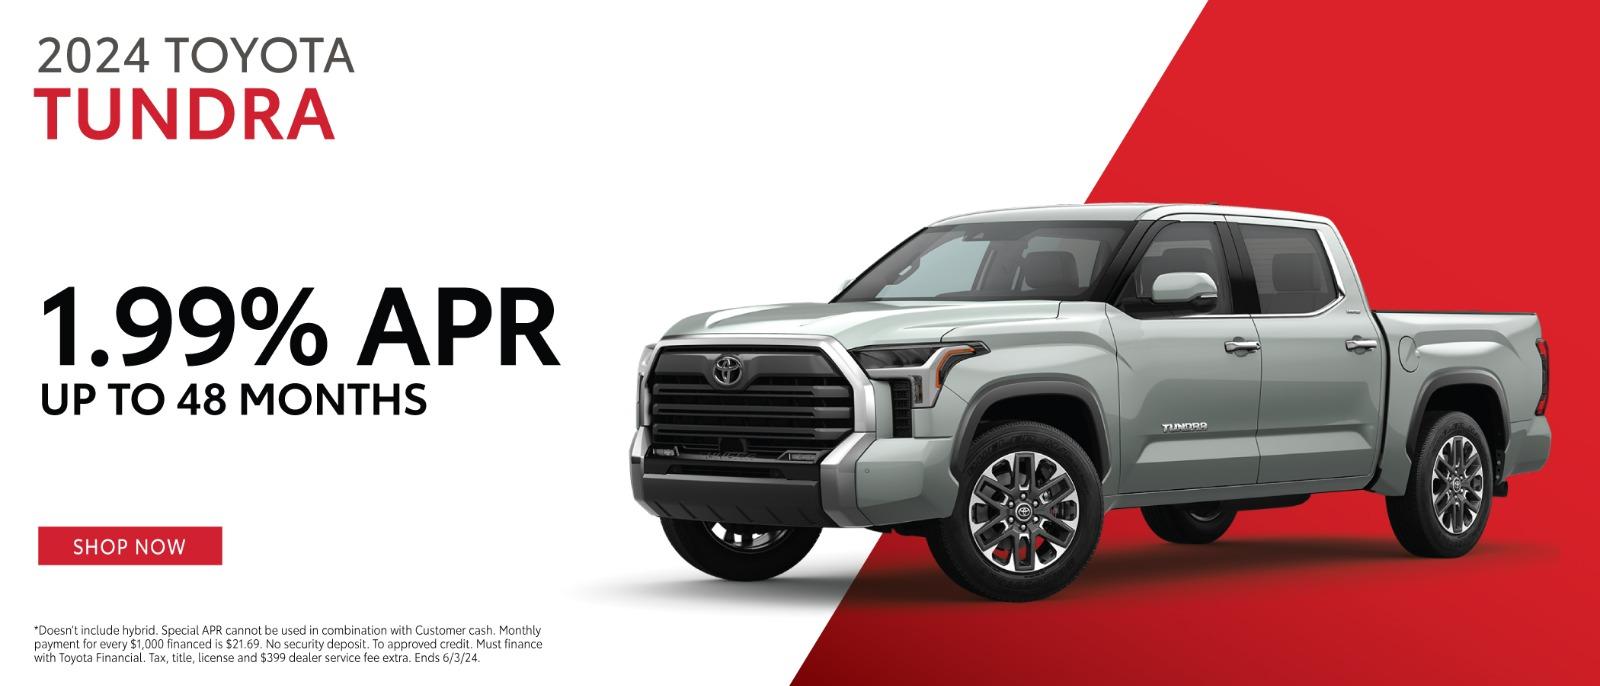 2024 Toyota Tundra | 1.99% APR up to 48 Months